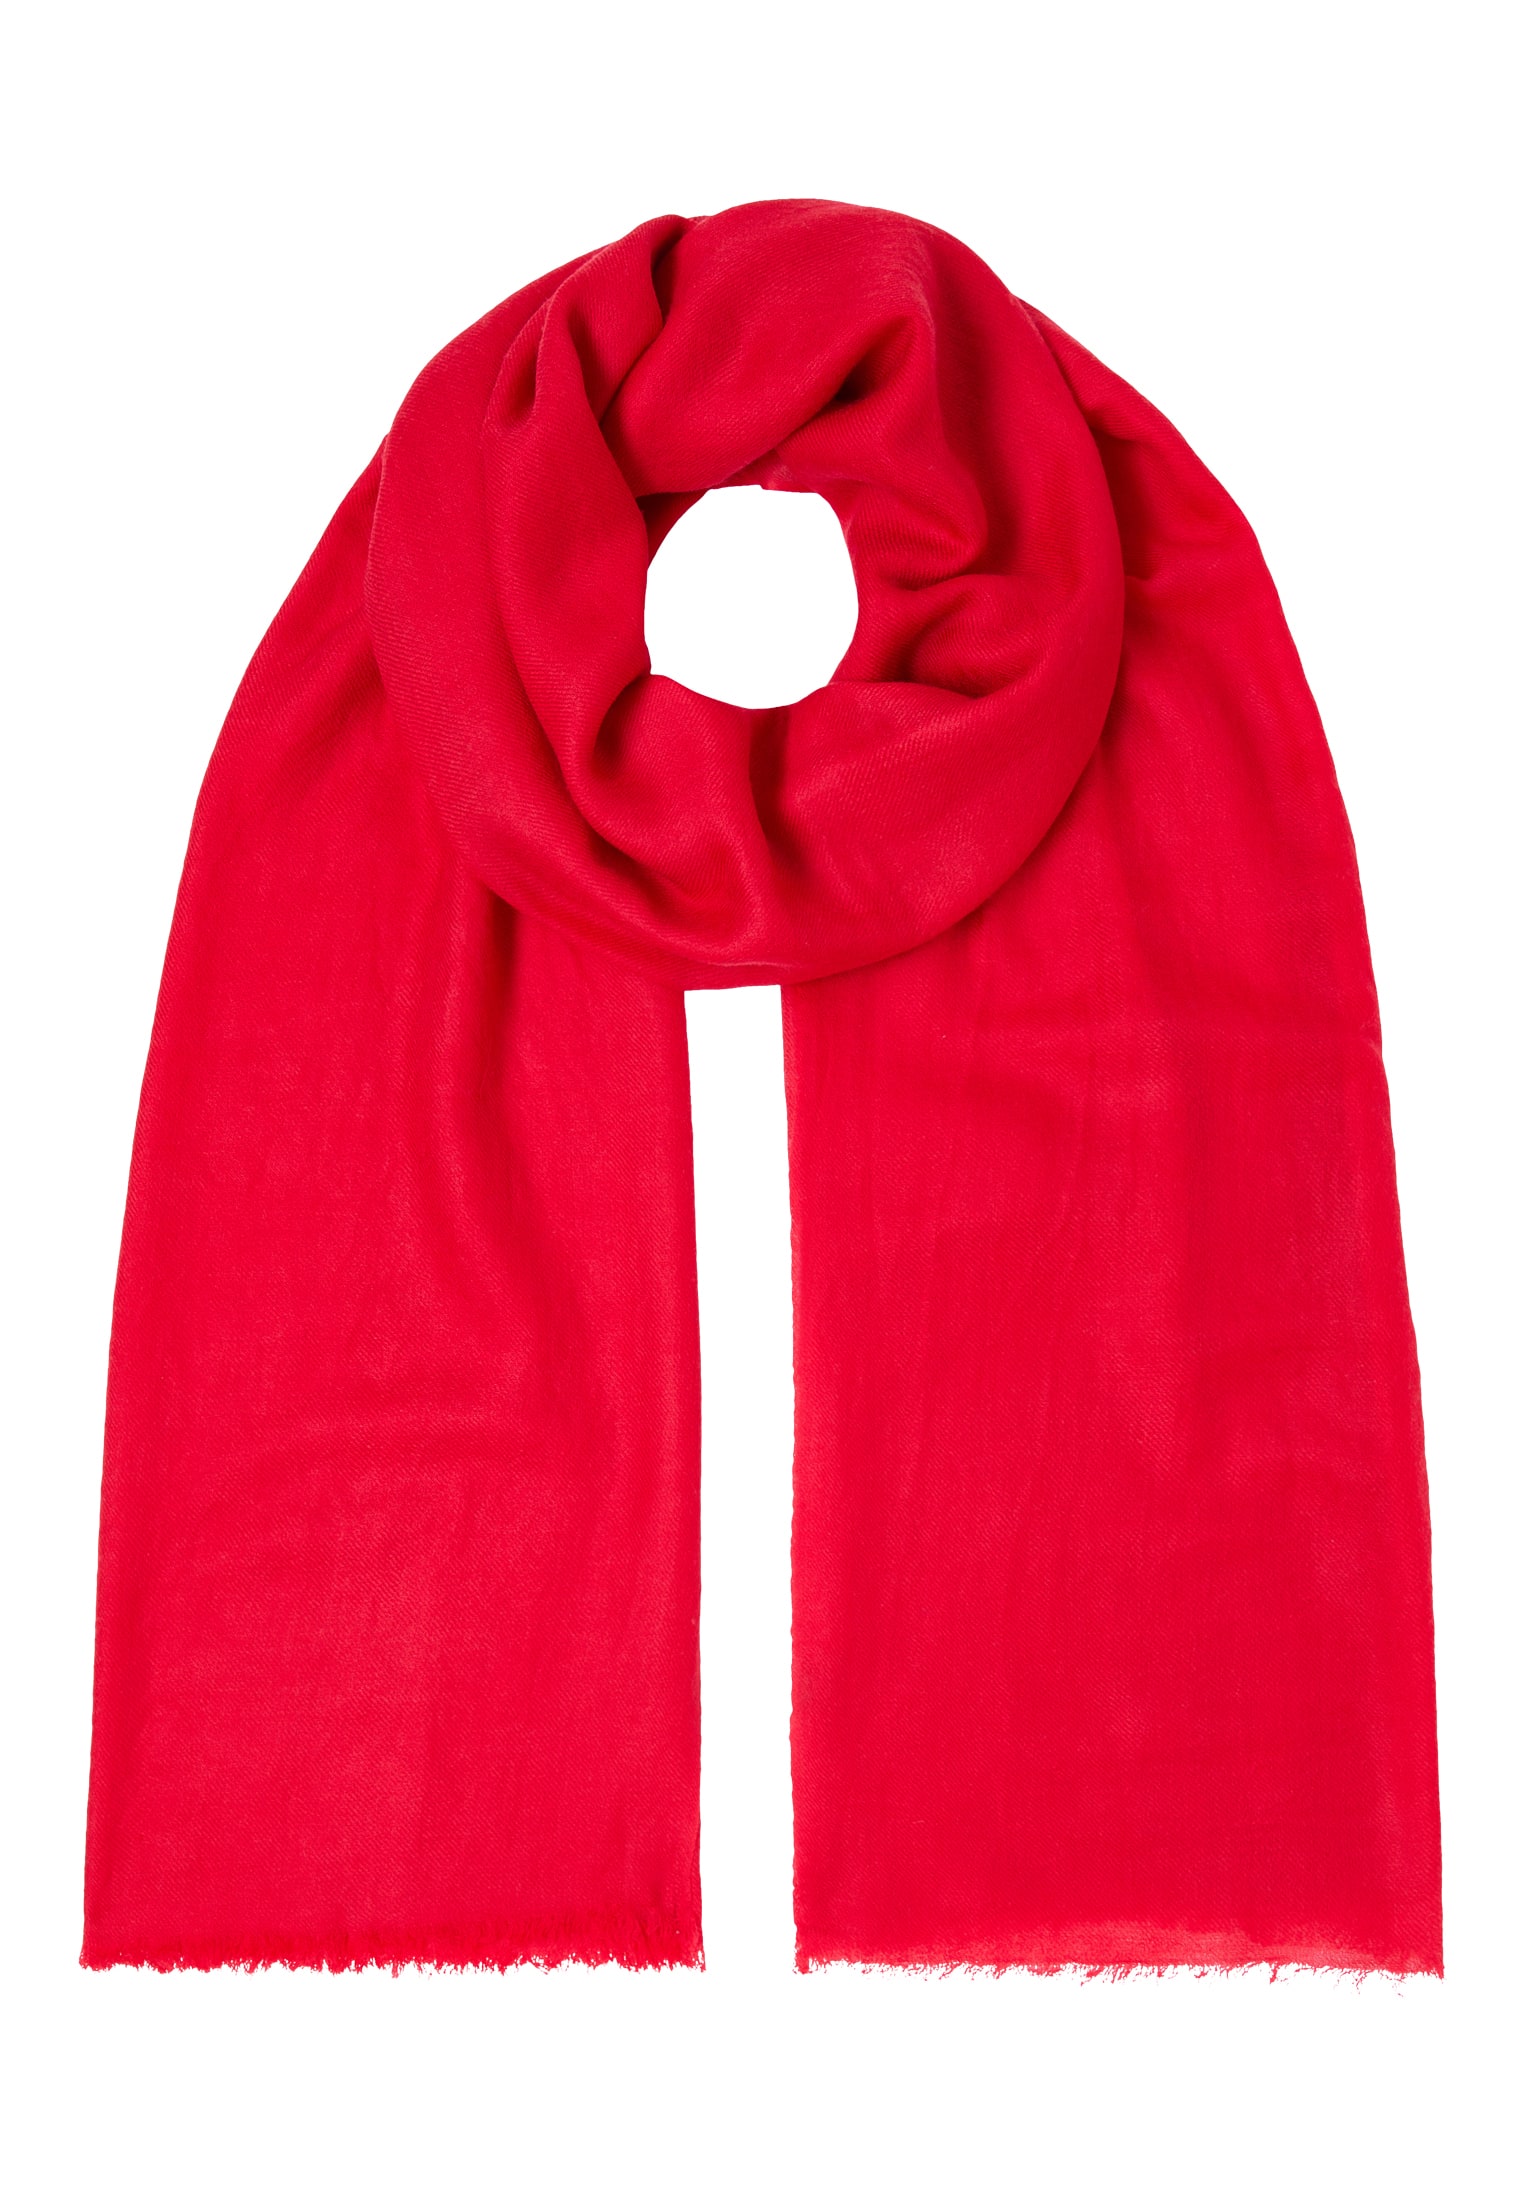 Scarf in red plain